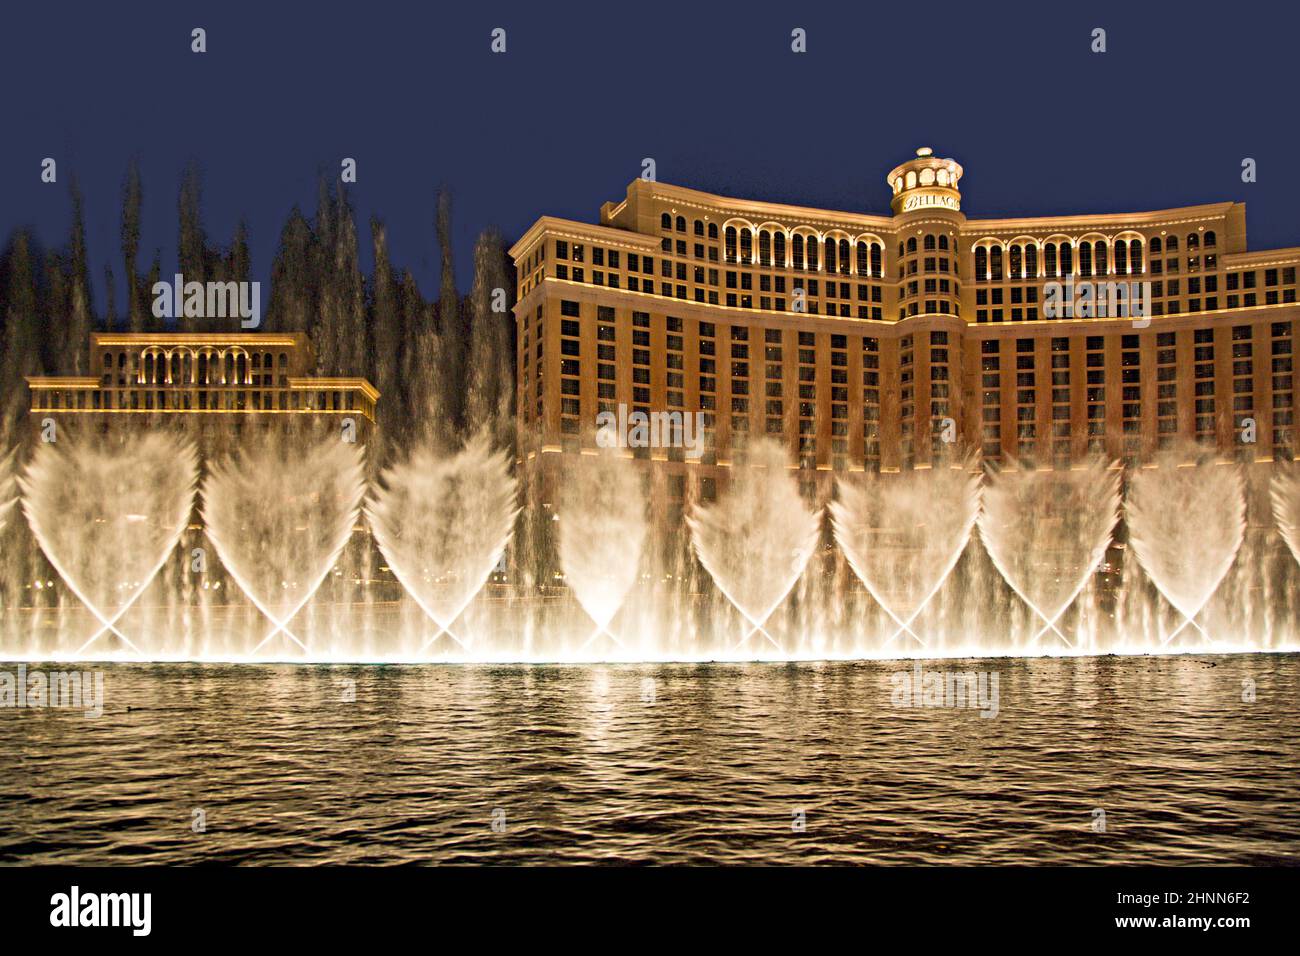 Las Vegas Bellagio Hotel Casino, featured with its world famous fountain show, at night with fountains  in Las Vegas, Nevada Stock Photo